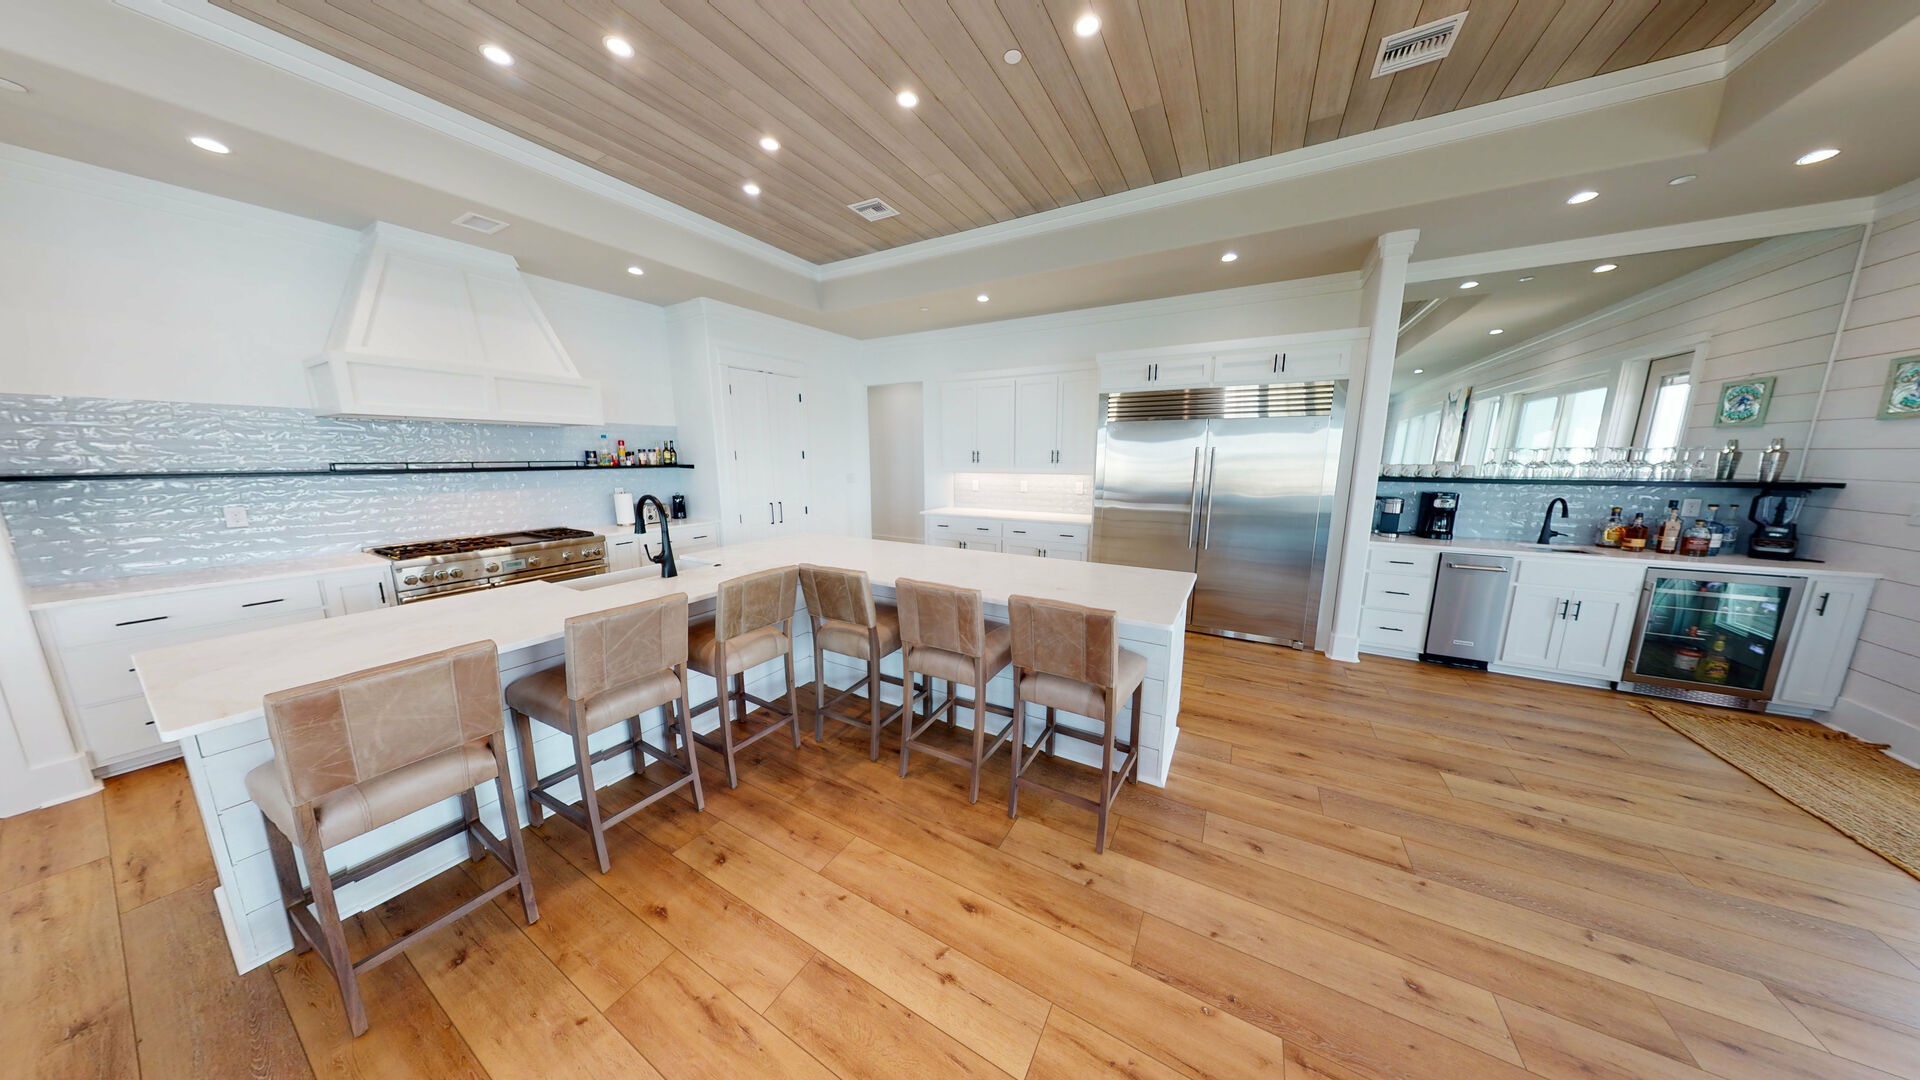 There is additional seating at the island in the beautiful designer kitchen